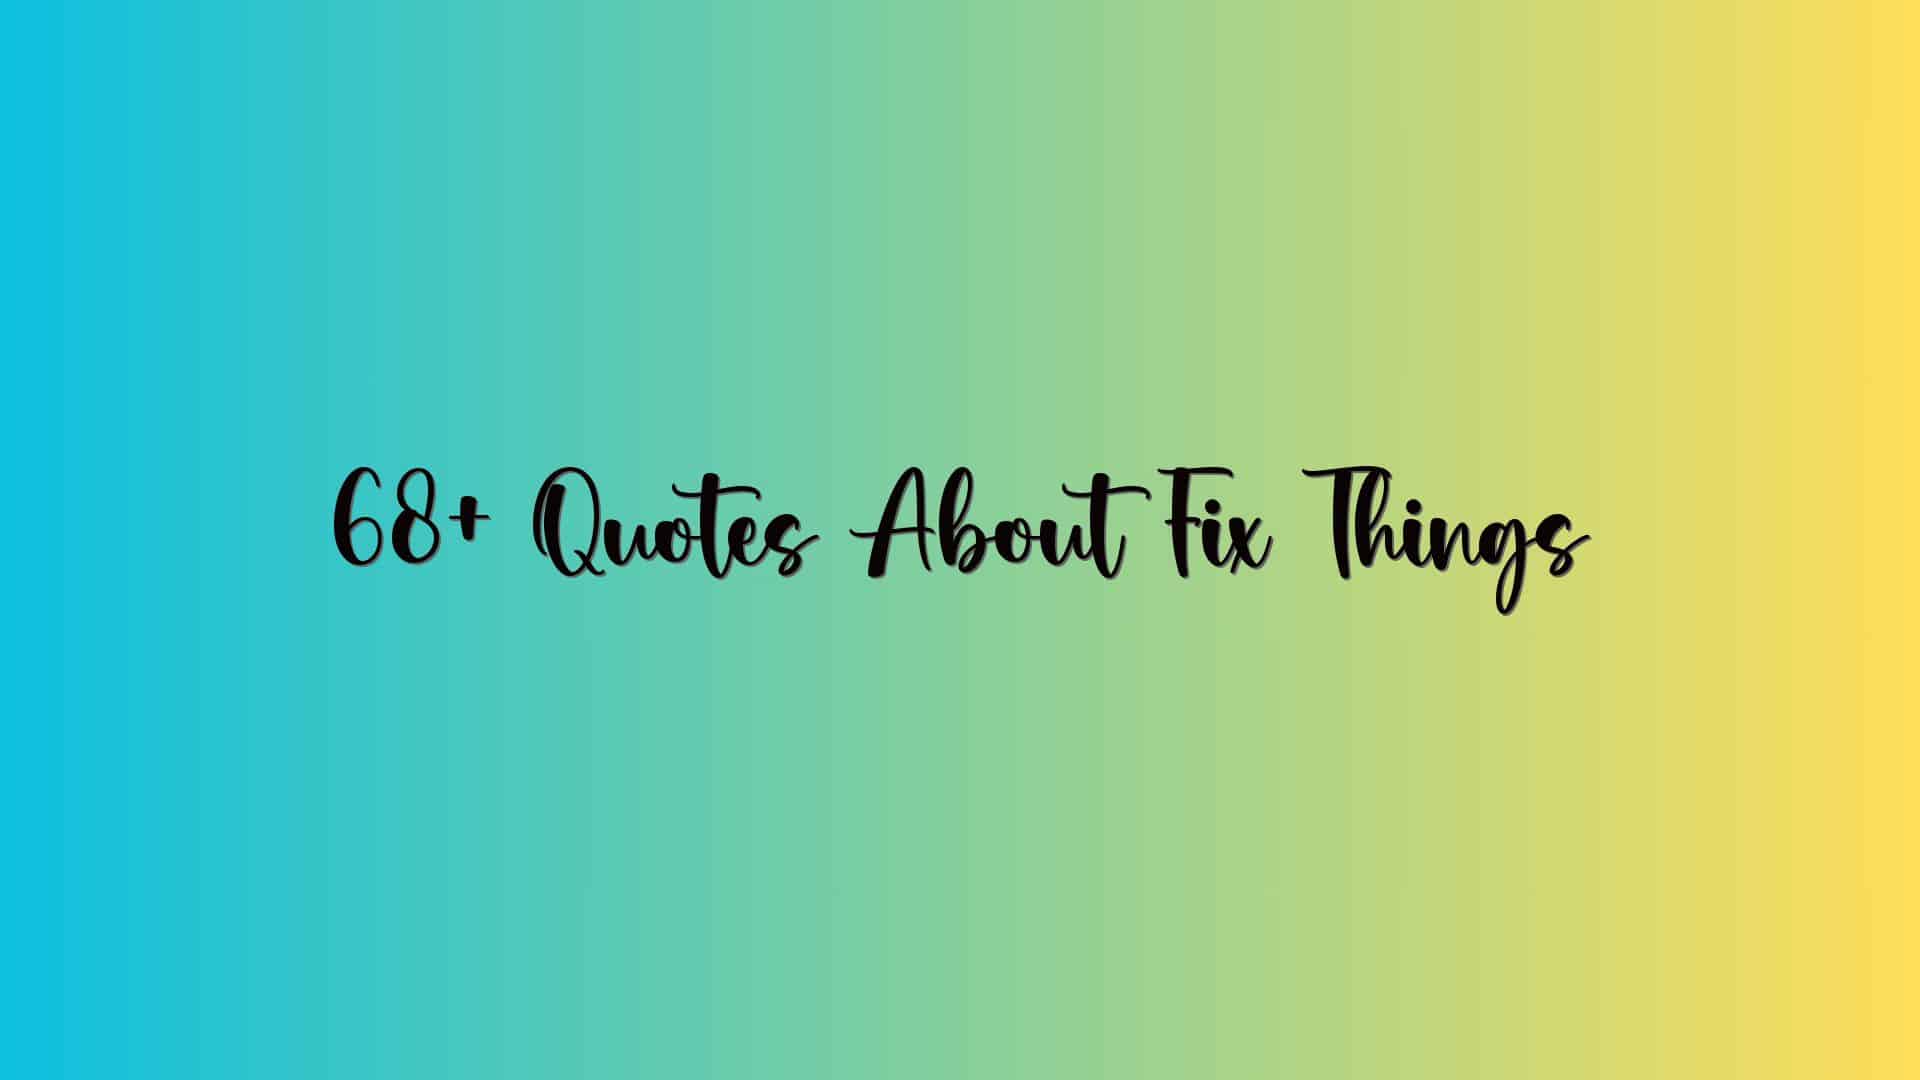 68+ Quotes About Fix Things